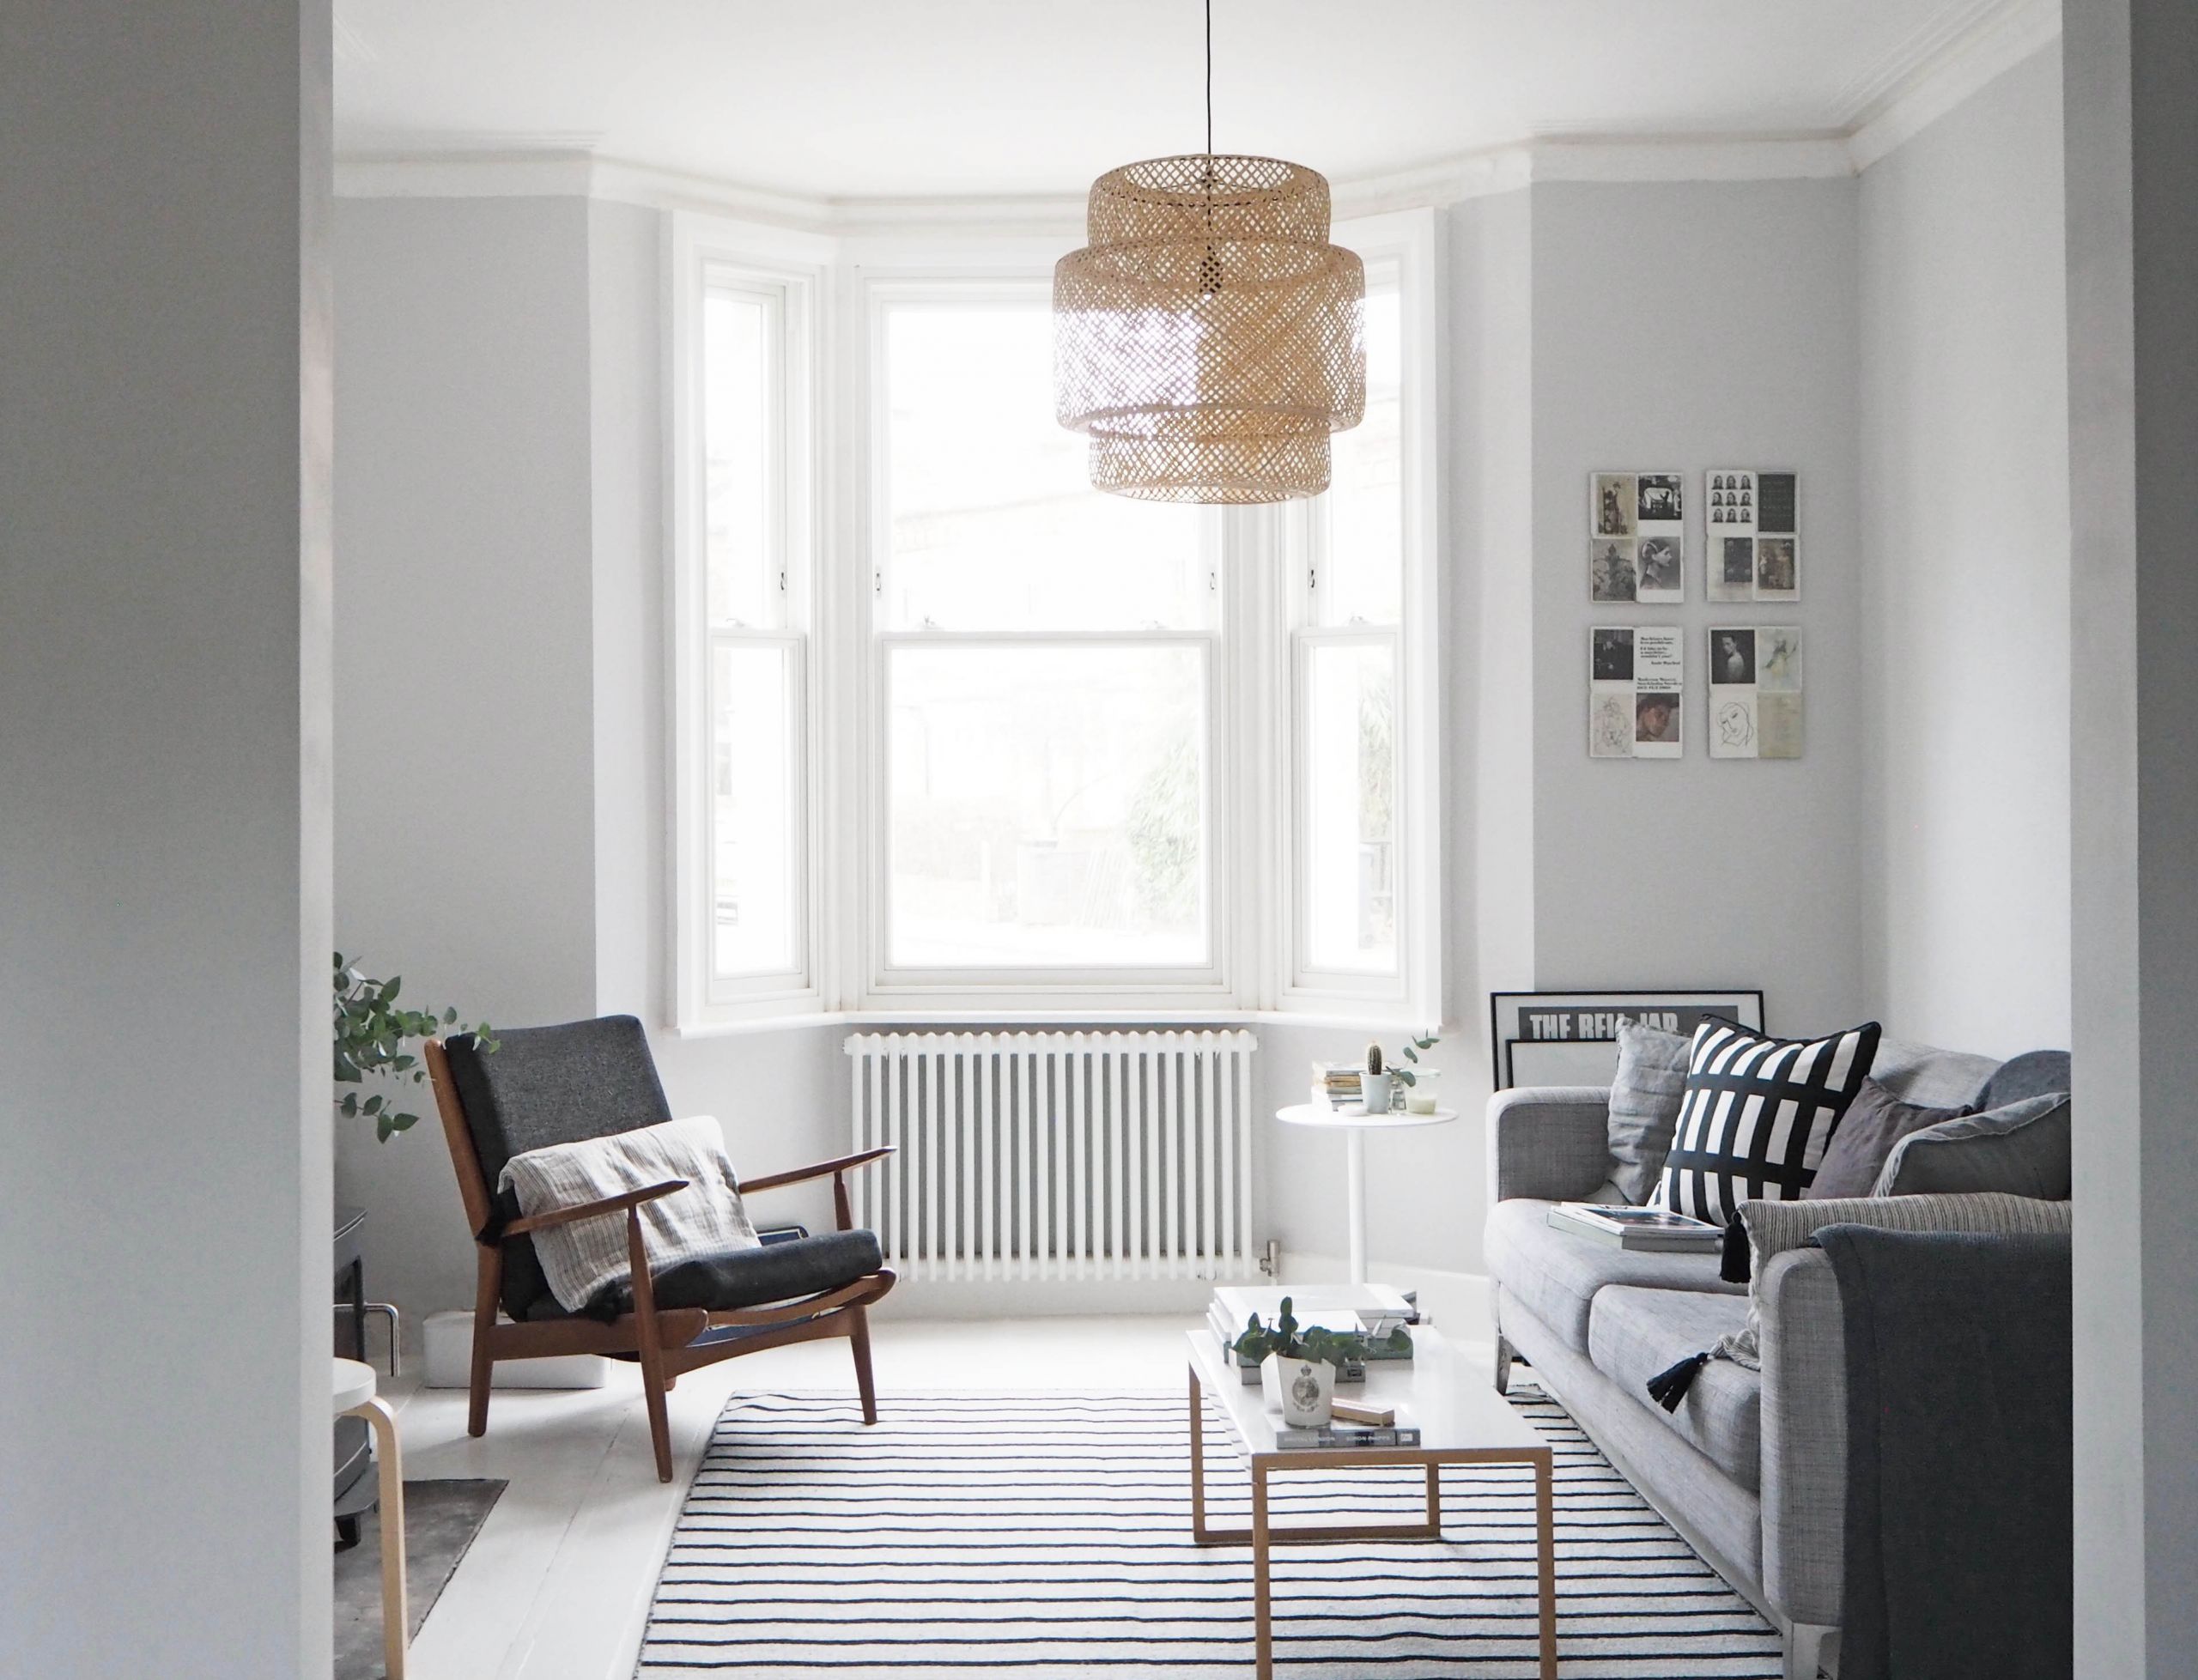 Light Grey Walls Living Room
 My Scandi style living room makeover – painted white